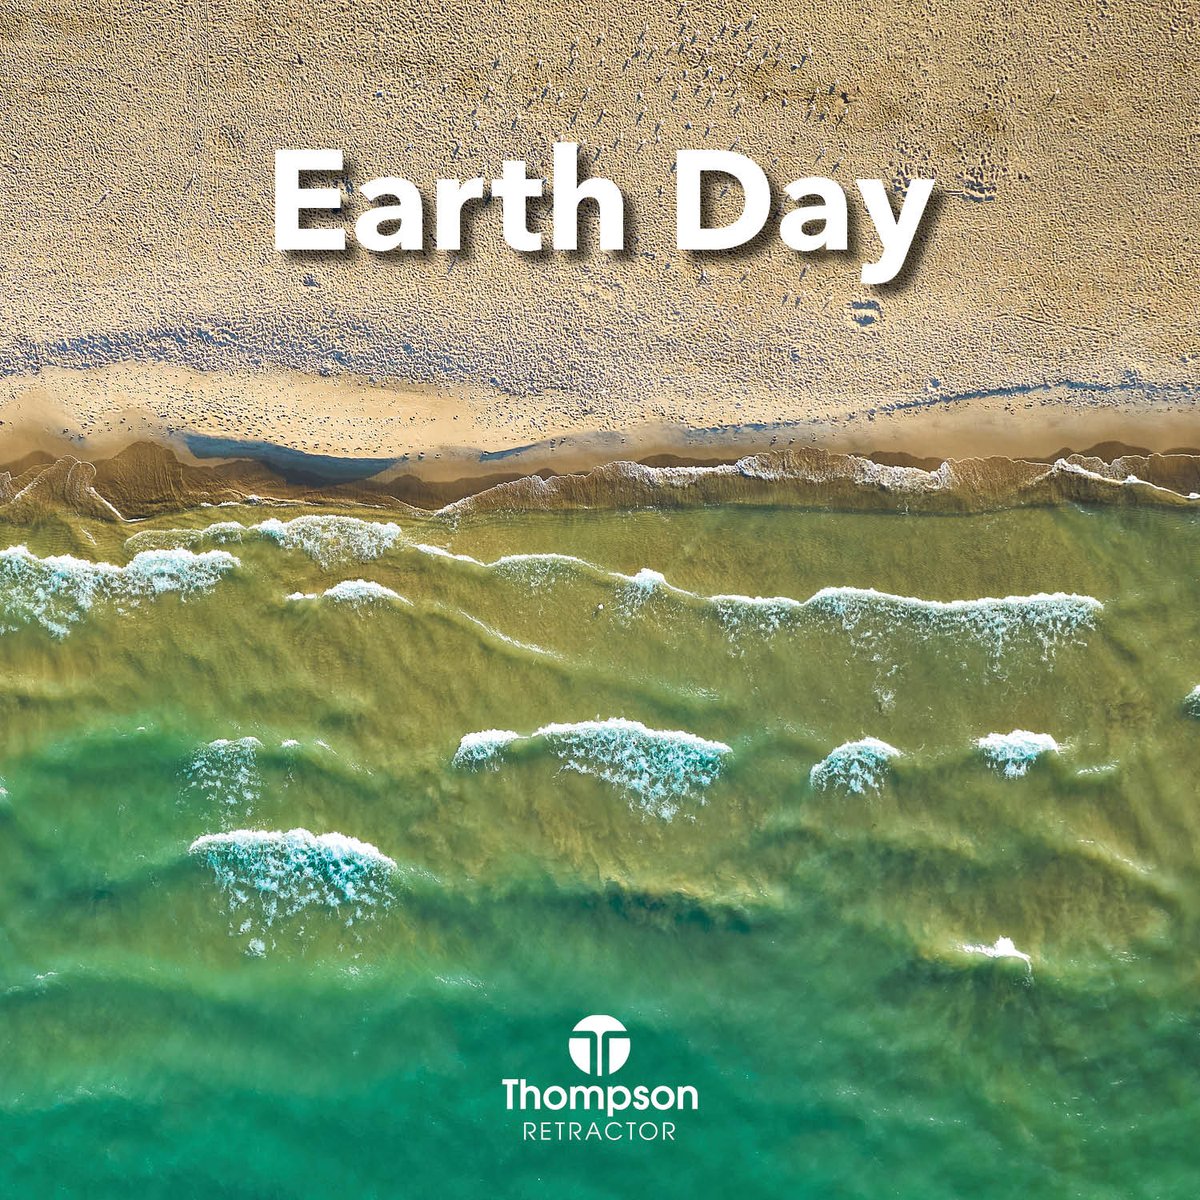 This earth day we take a moment to recognize our commitment to the initiatives that help keep our local region and the world a cleaner place. TART Trails, Boardman River, and OCEANA all do important work. Explore these amazing groups and others! #earthday #thompsonretractor